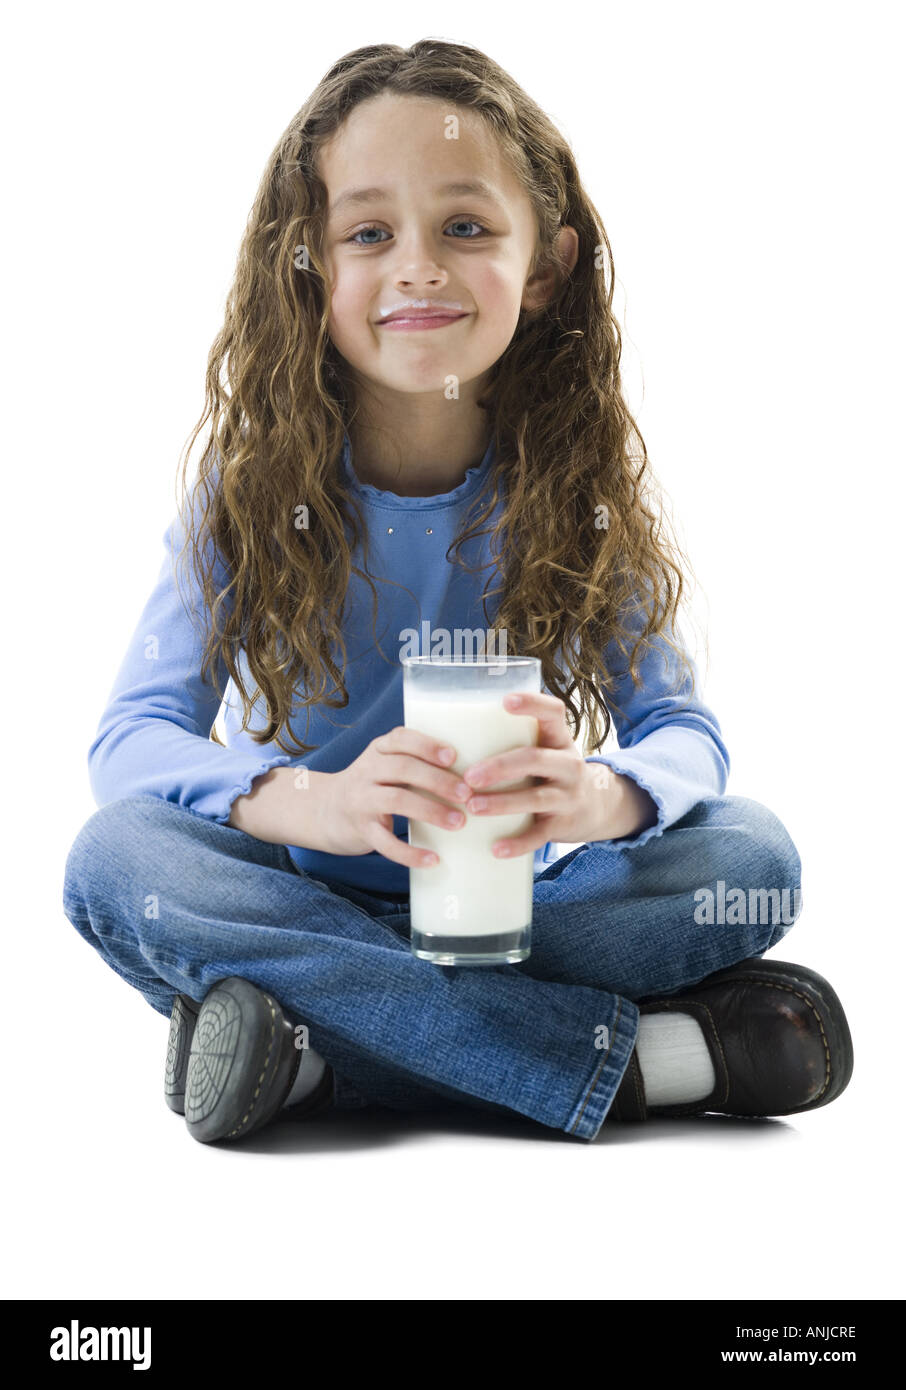 Portrait of a girl sitting on the floor and holding a glass of milk Stock Photo